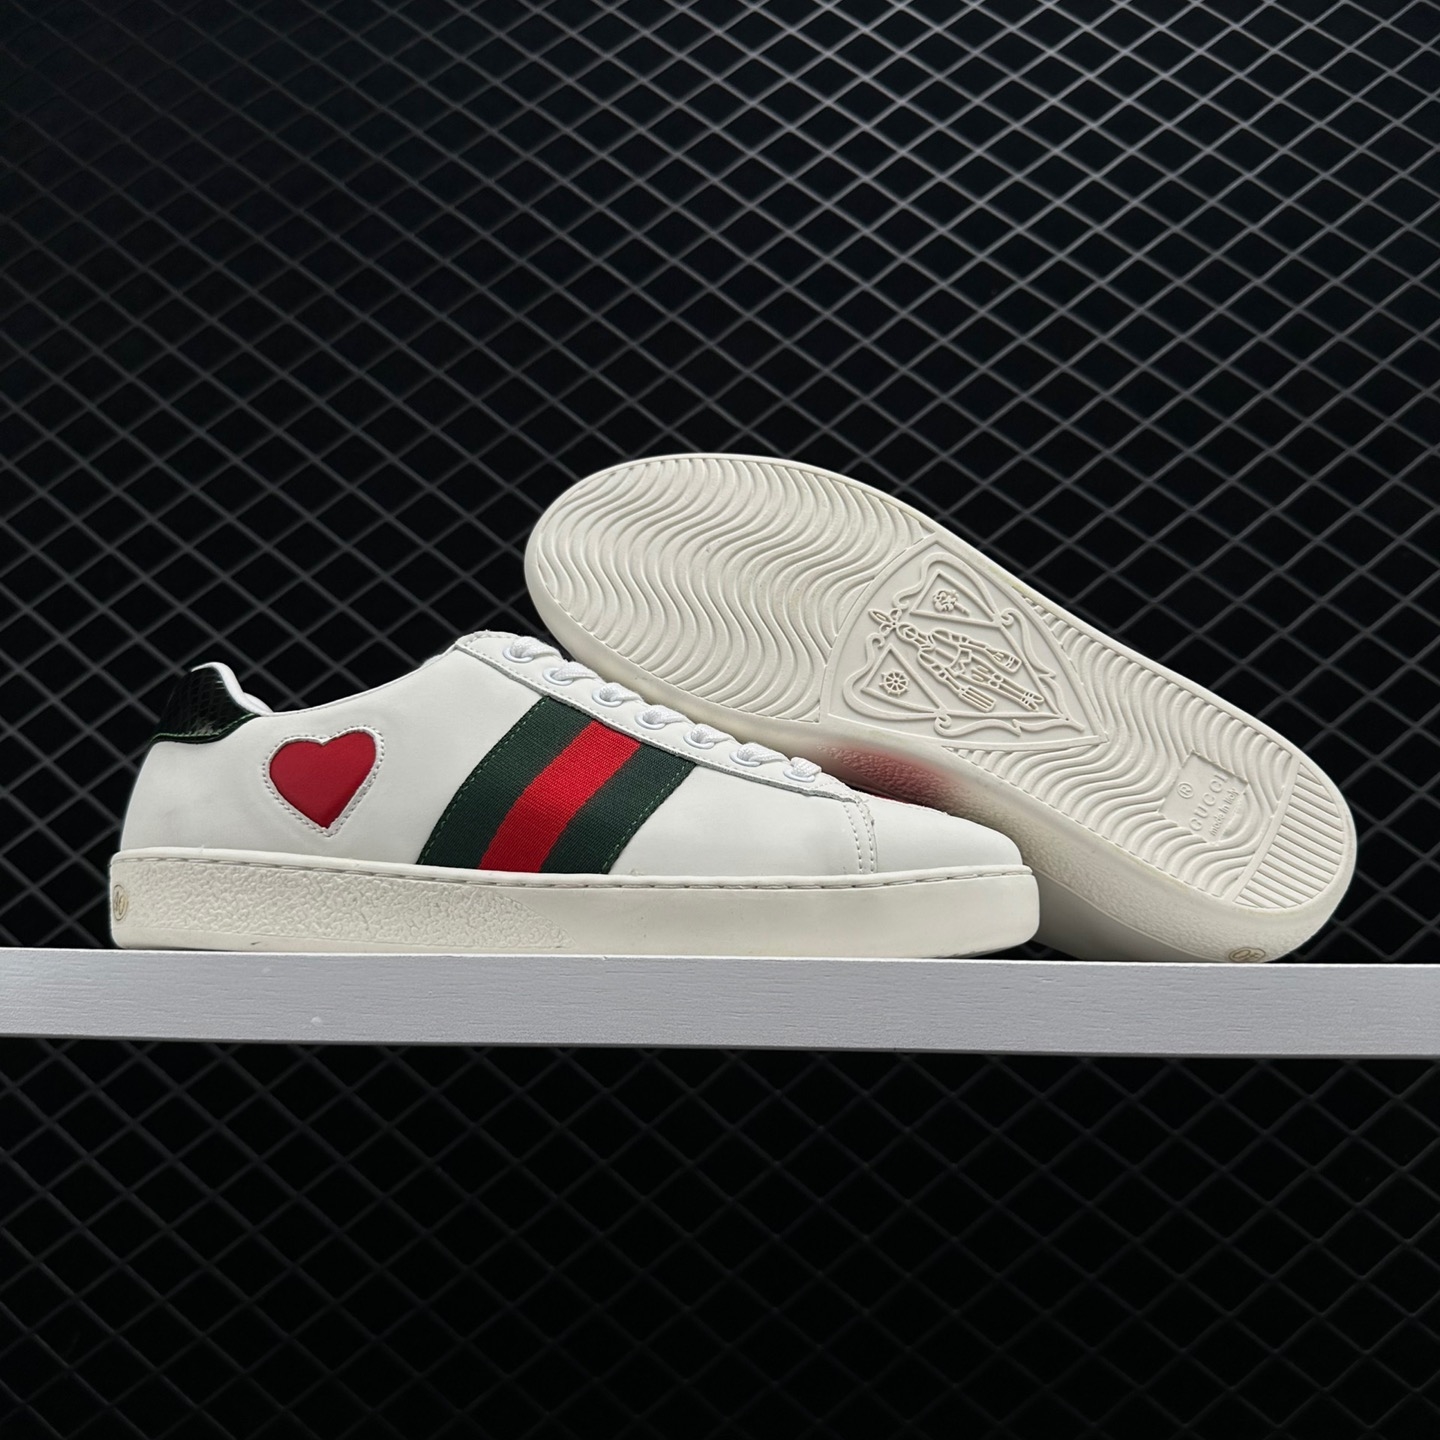 Gucci Ace Embroidered Hearts 435638 A38M0 9074, Luxury Sneakers by Gucci